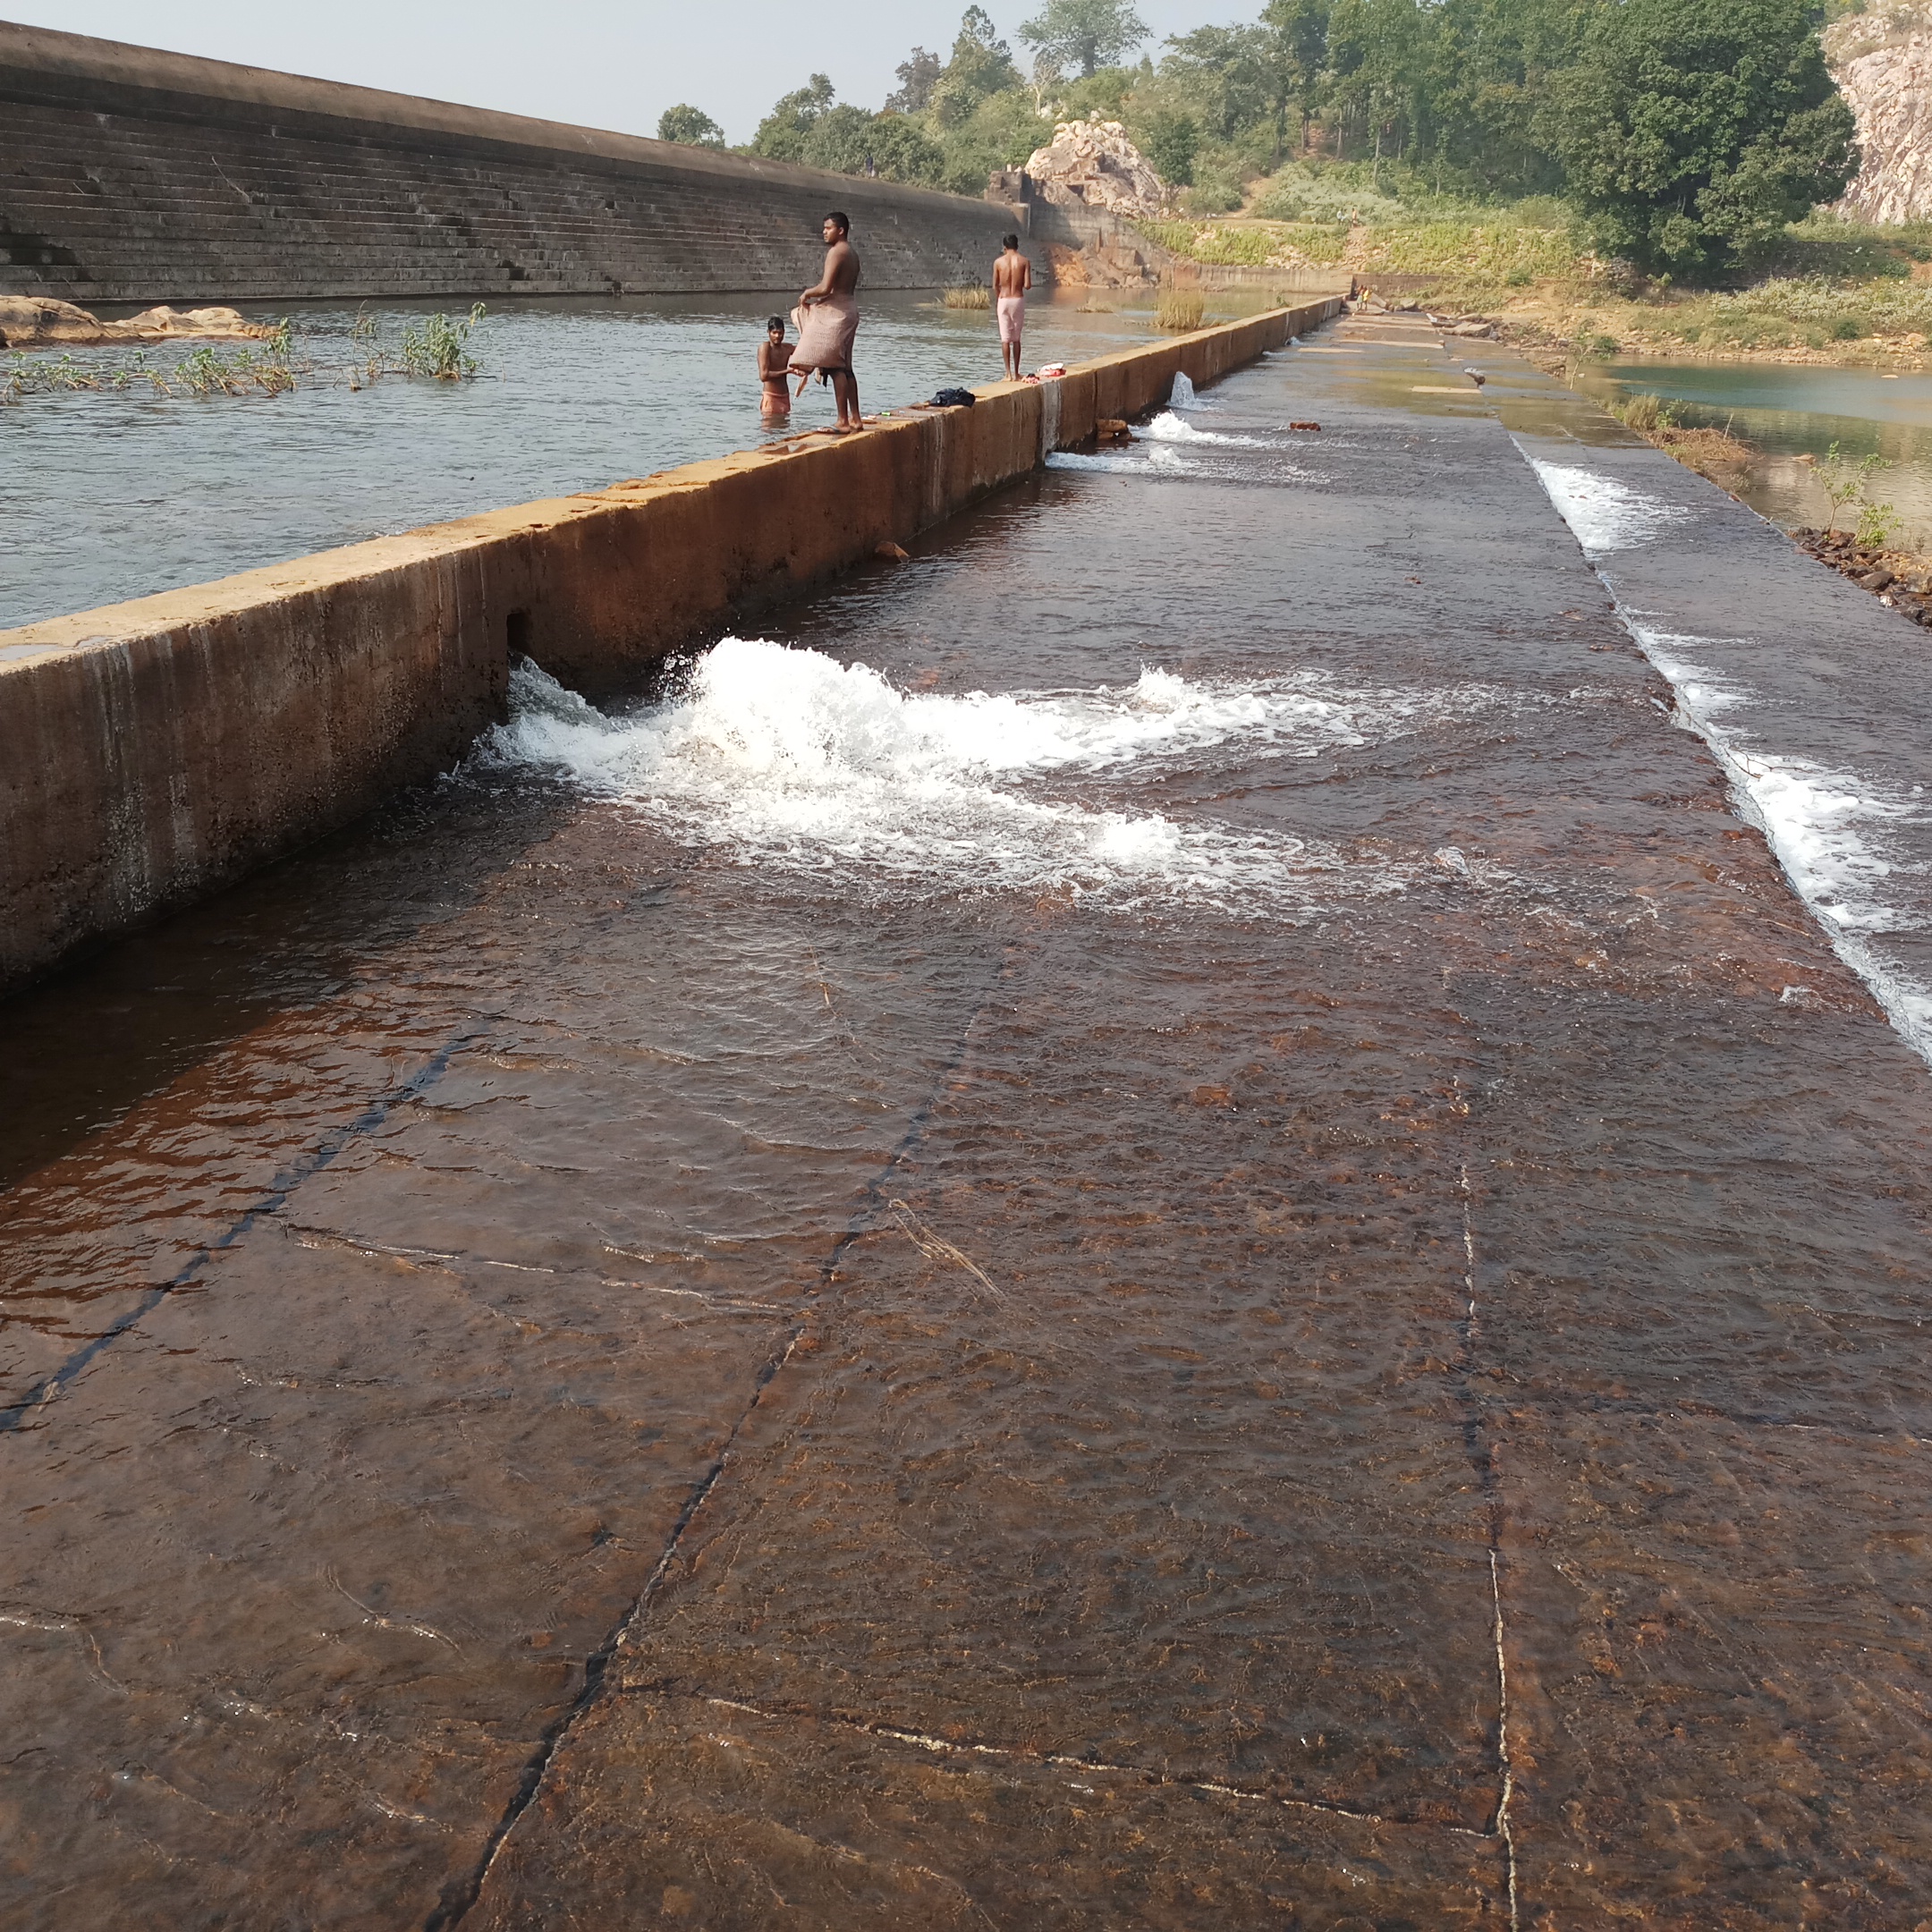 People use the dam water to bathe and wash their cloths now. (Photo courtesy: Gurvinder Singh)